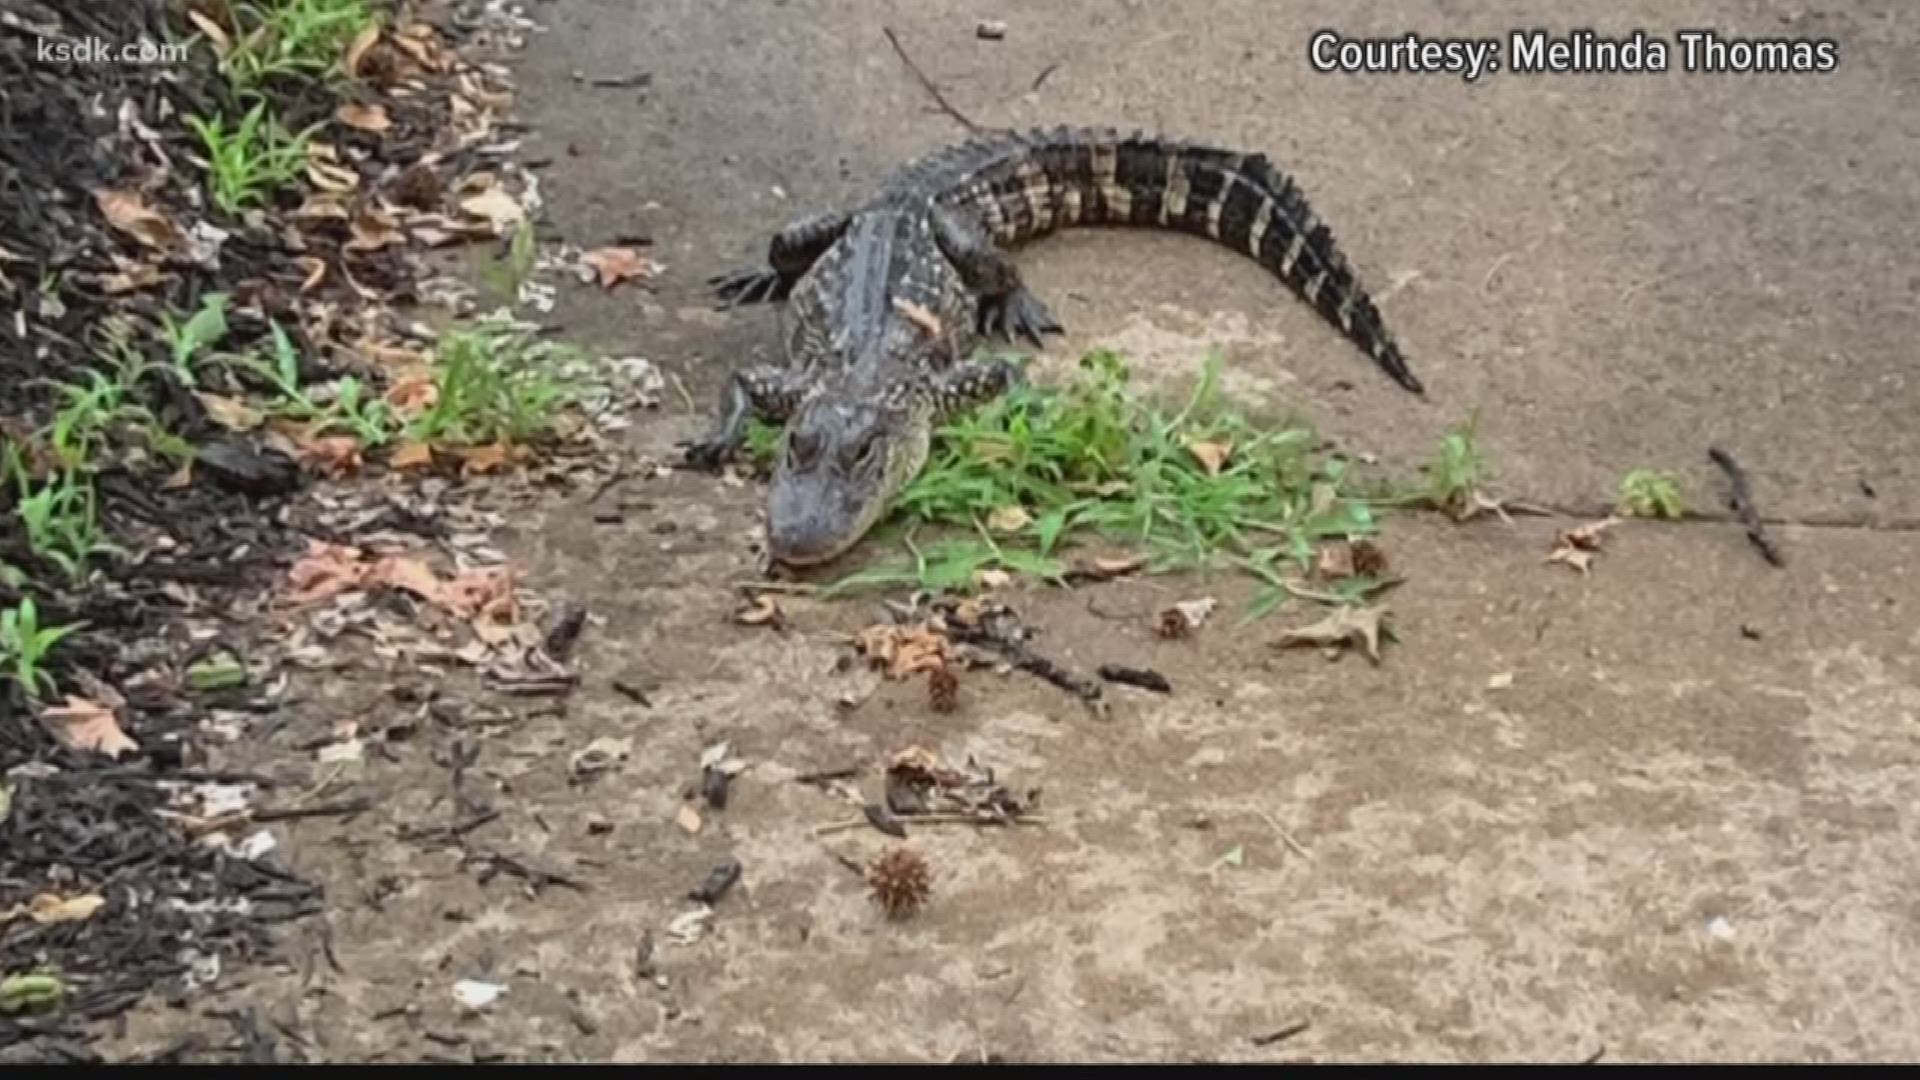 Alligators aren't native to Missouri, but one made himself at home in a Dutchtown neighborhood last week.